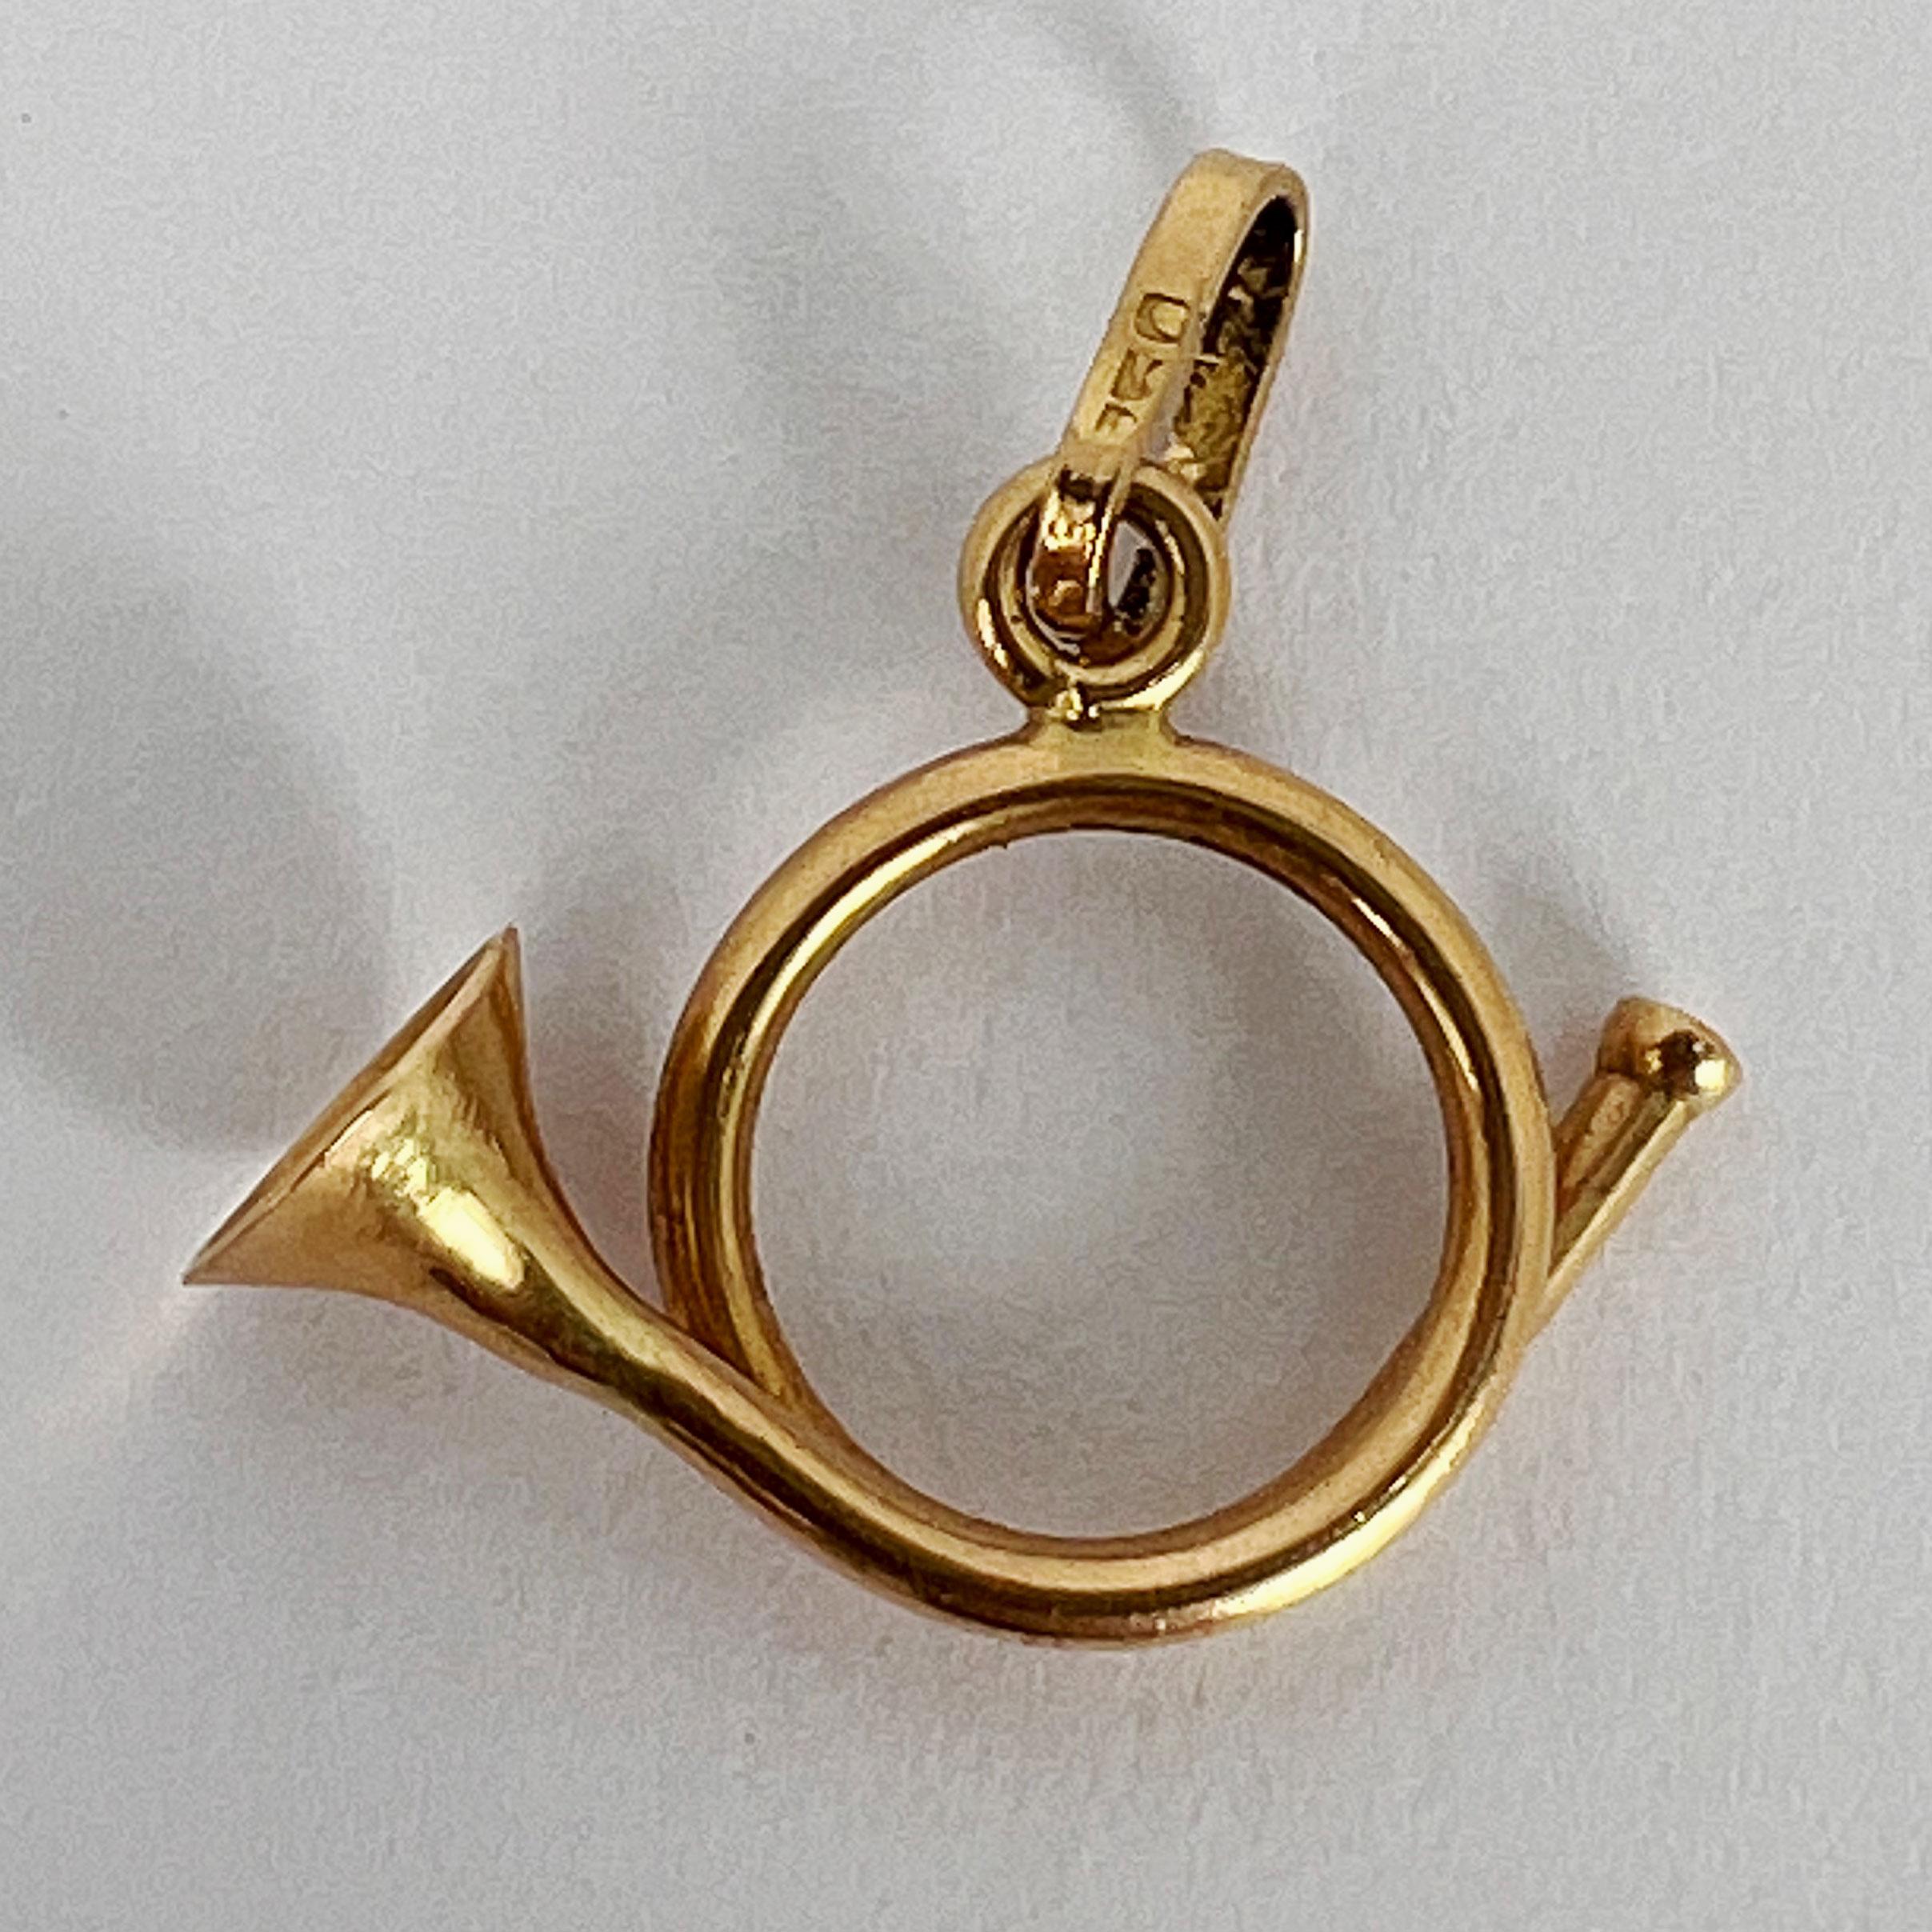 French Horn 18K Yellow Gold Charm Pendant For Sale 1